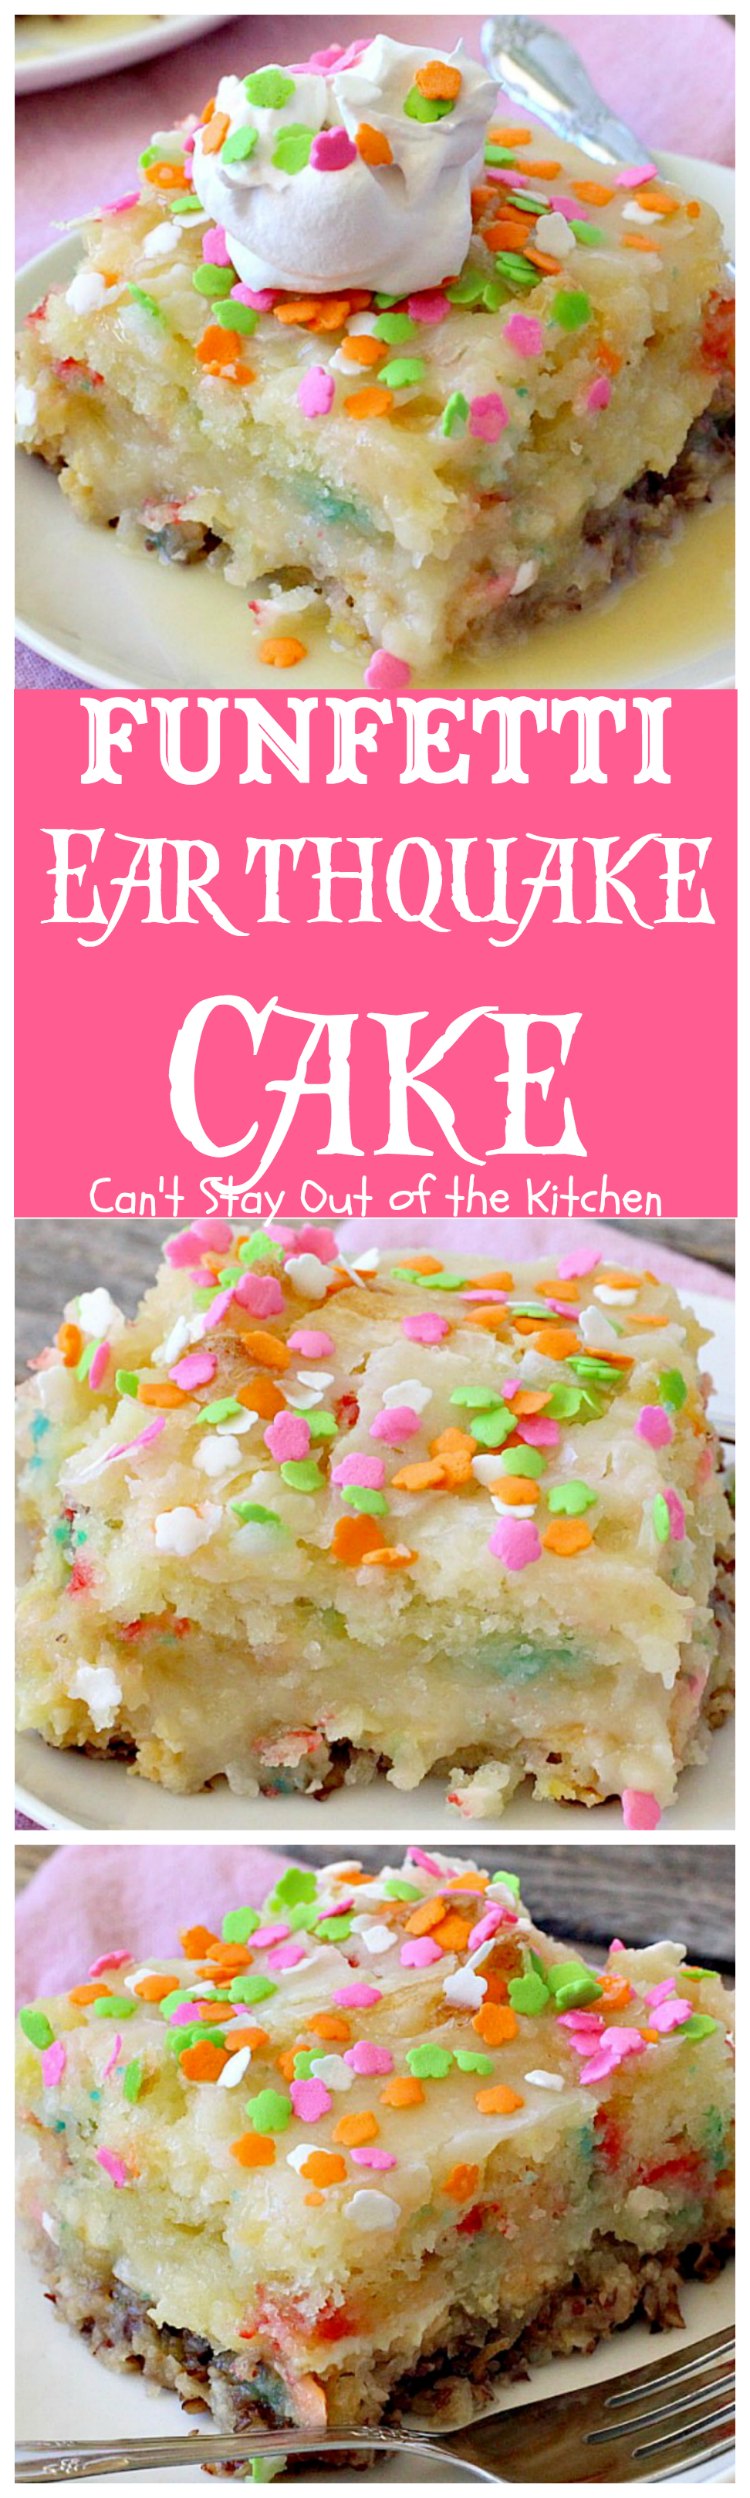 Funfetti Earthquake Cake | Can't Stay Out of the KitchenFunfetti Earthquake Cake | Can't Stay Out of the Kitchen